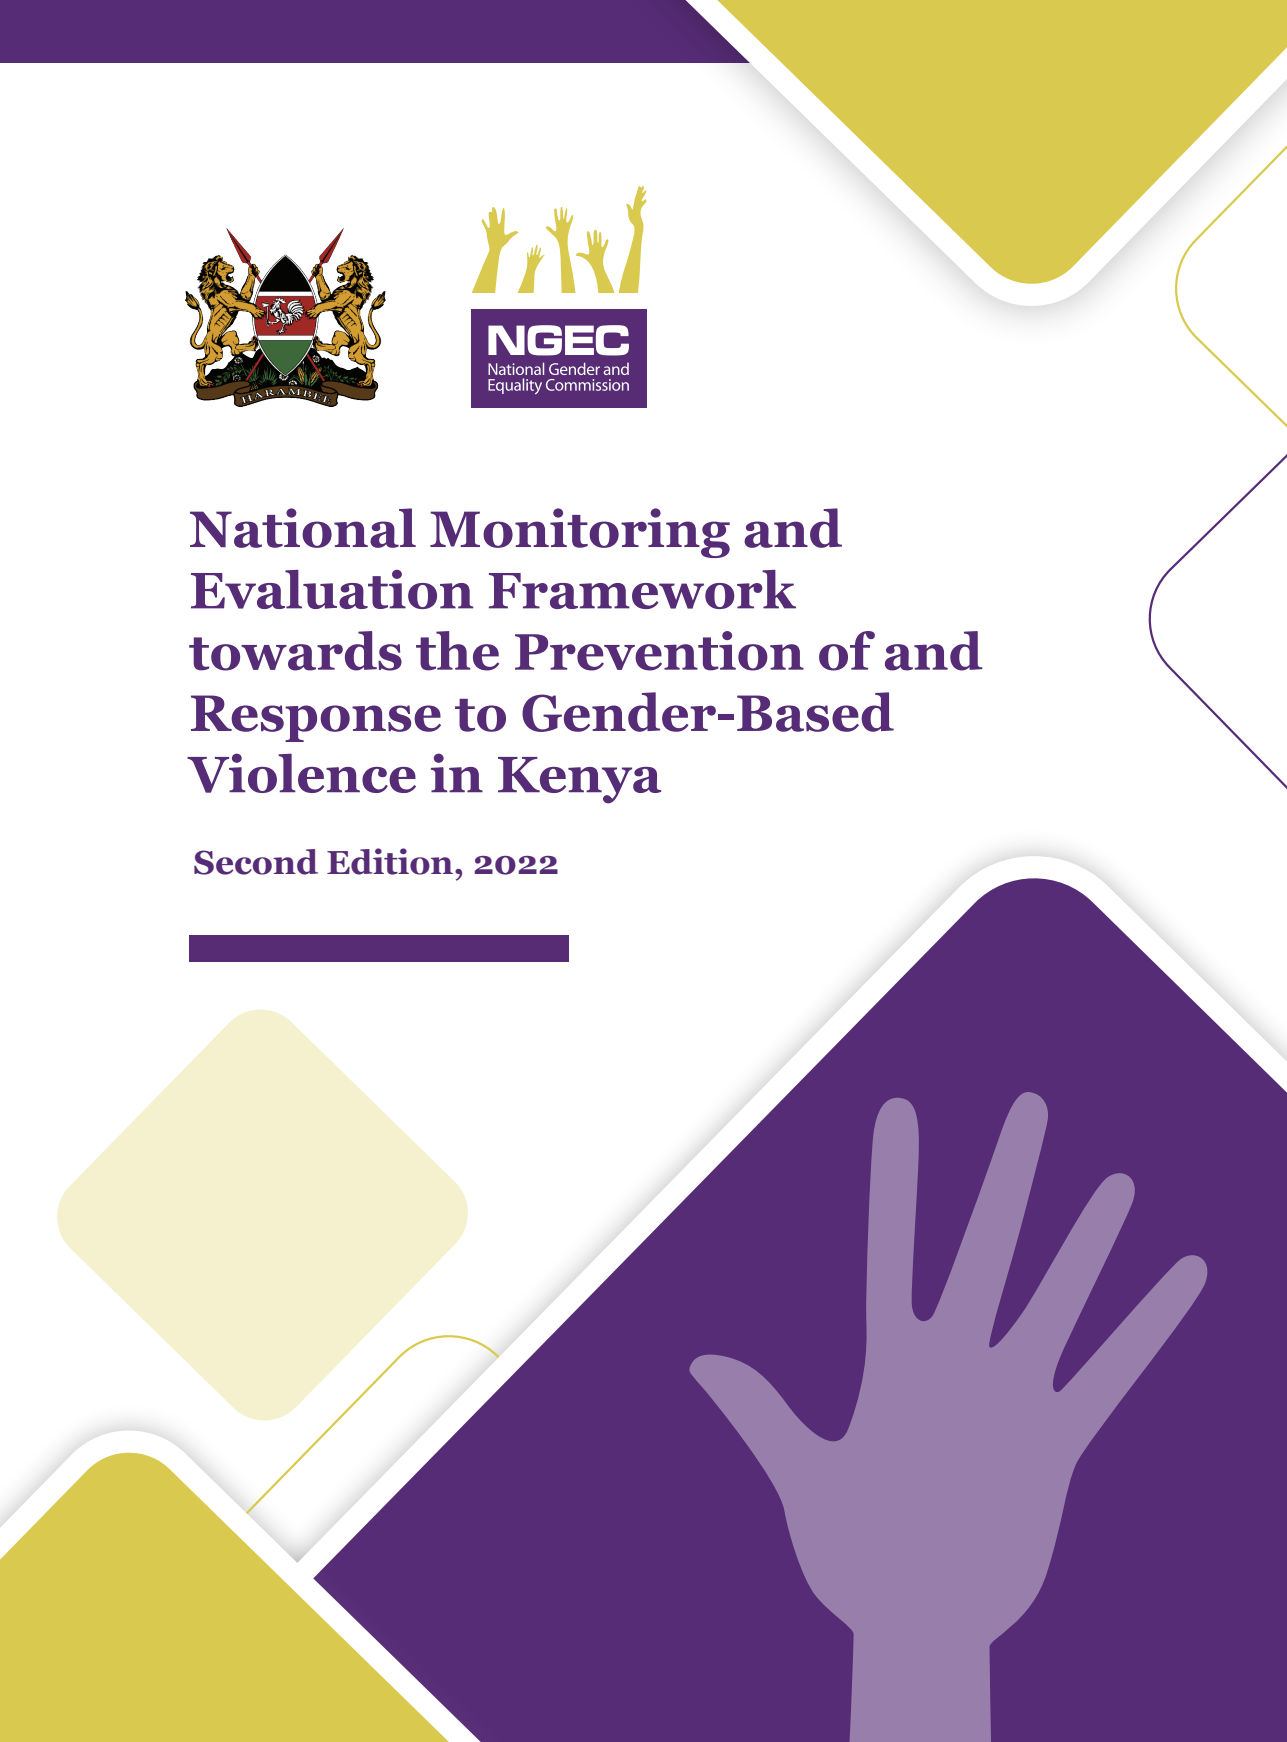 National Monitoring and Evaluation Framework towards prevention and response to Gender Based Violence